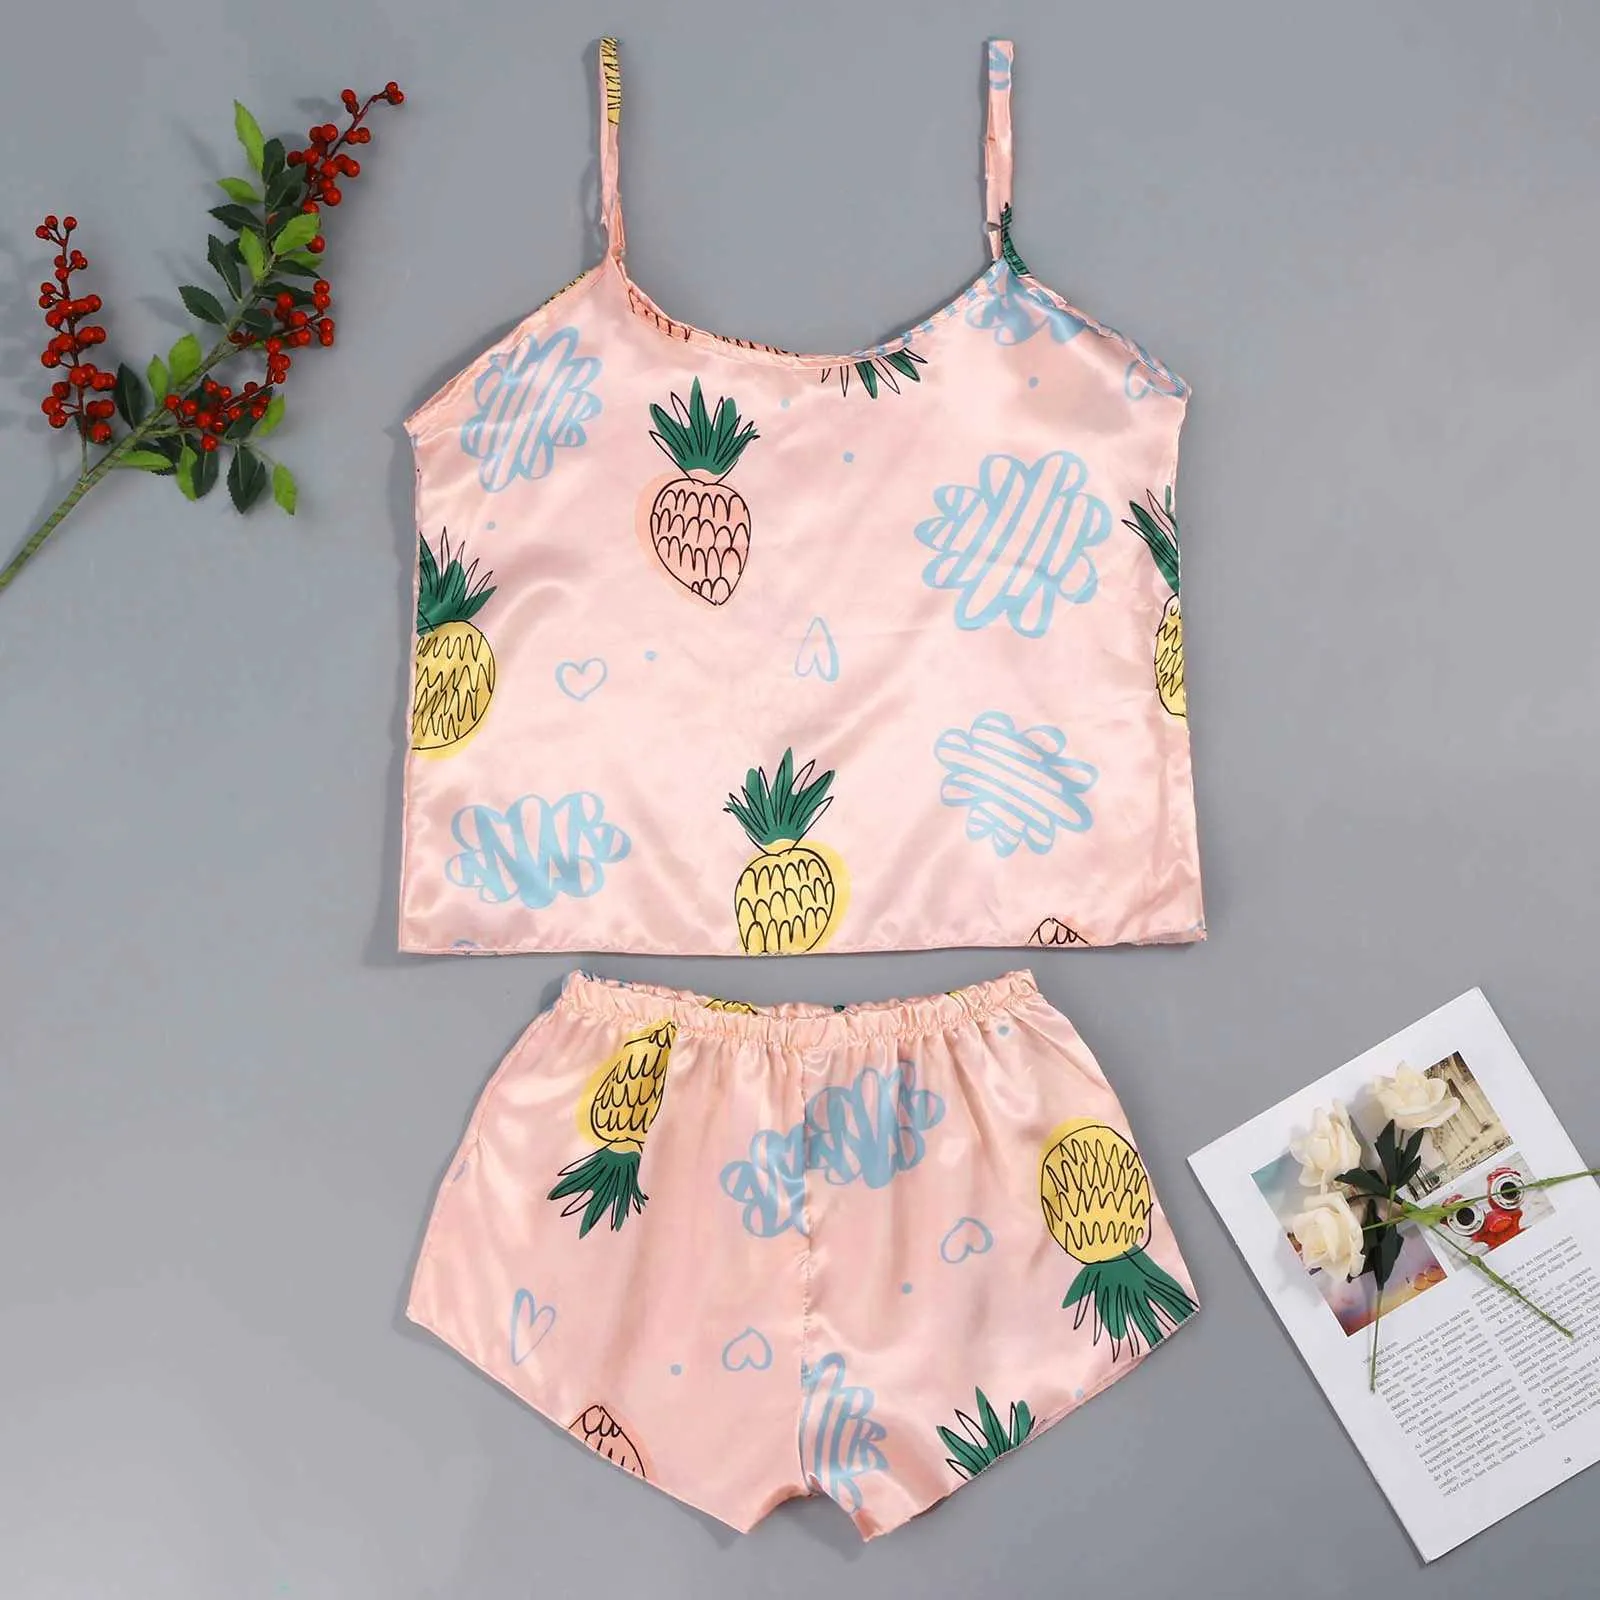 Simple And Cute Summer Lace Sling Sleep Shorts Pajama Set For Women Short  Sleeved Home Service Q0706 From Sihuai03, $7.78